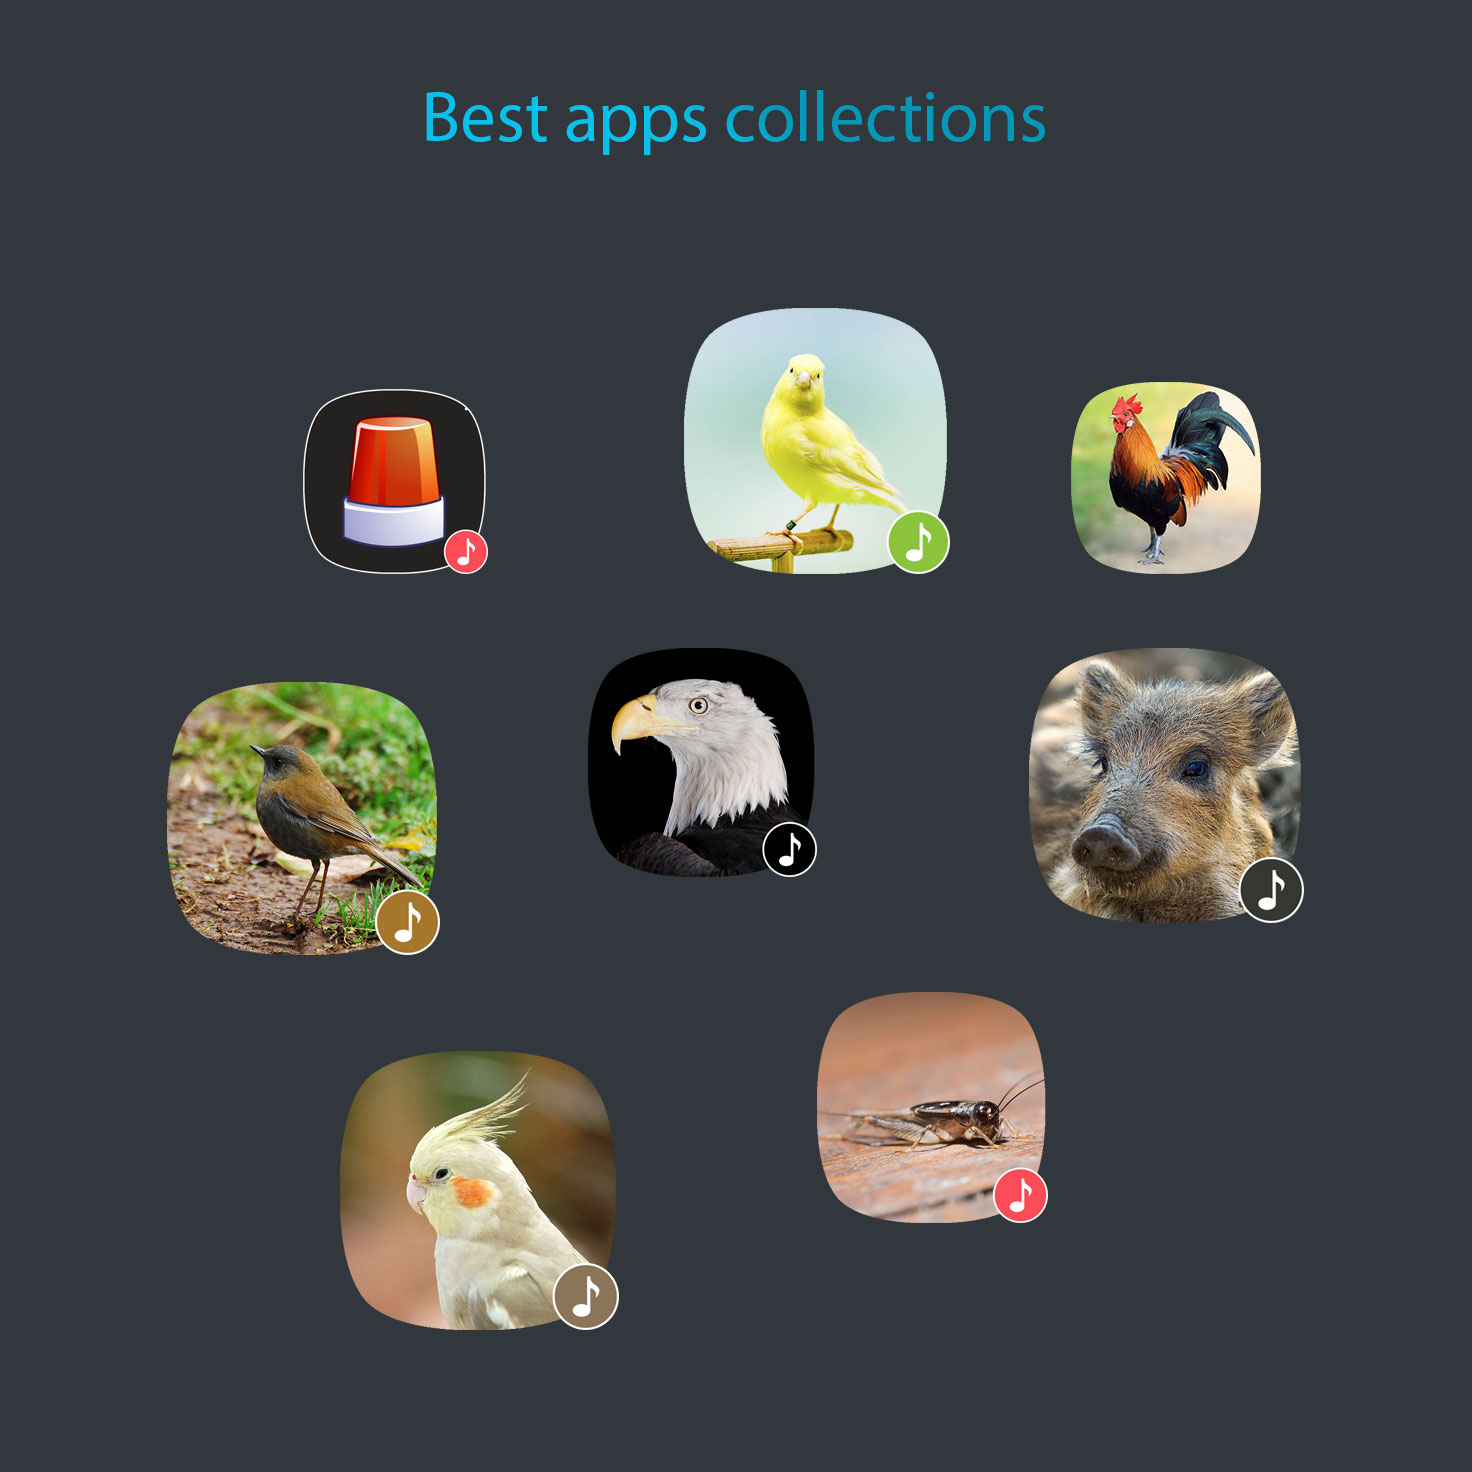 Best apps collections